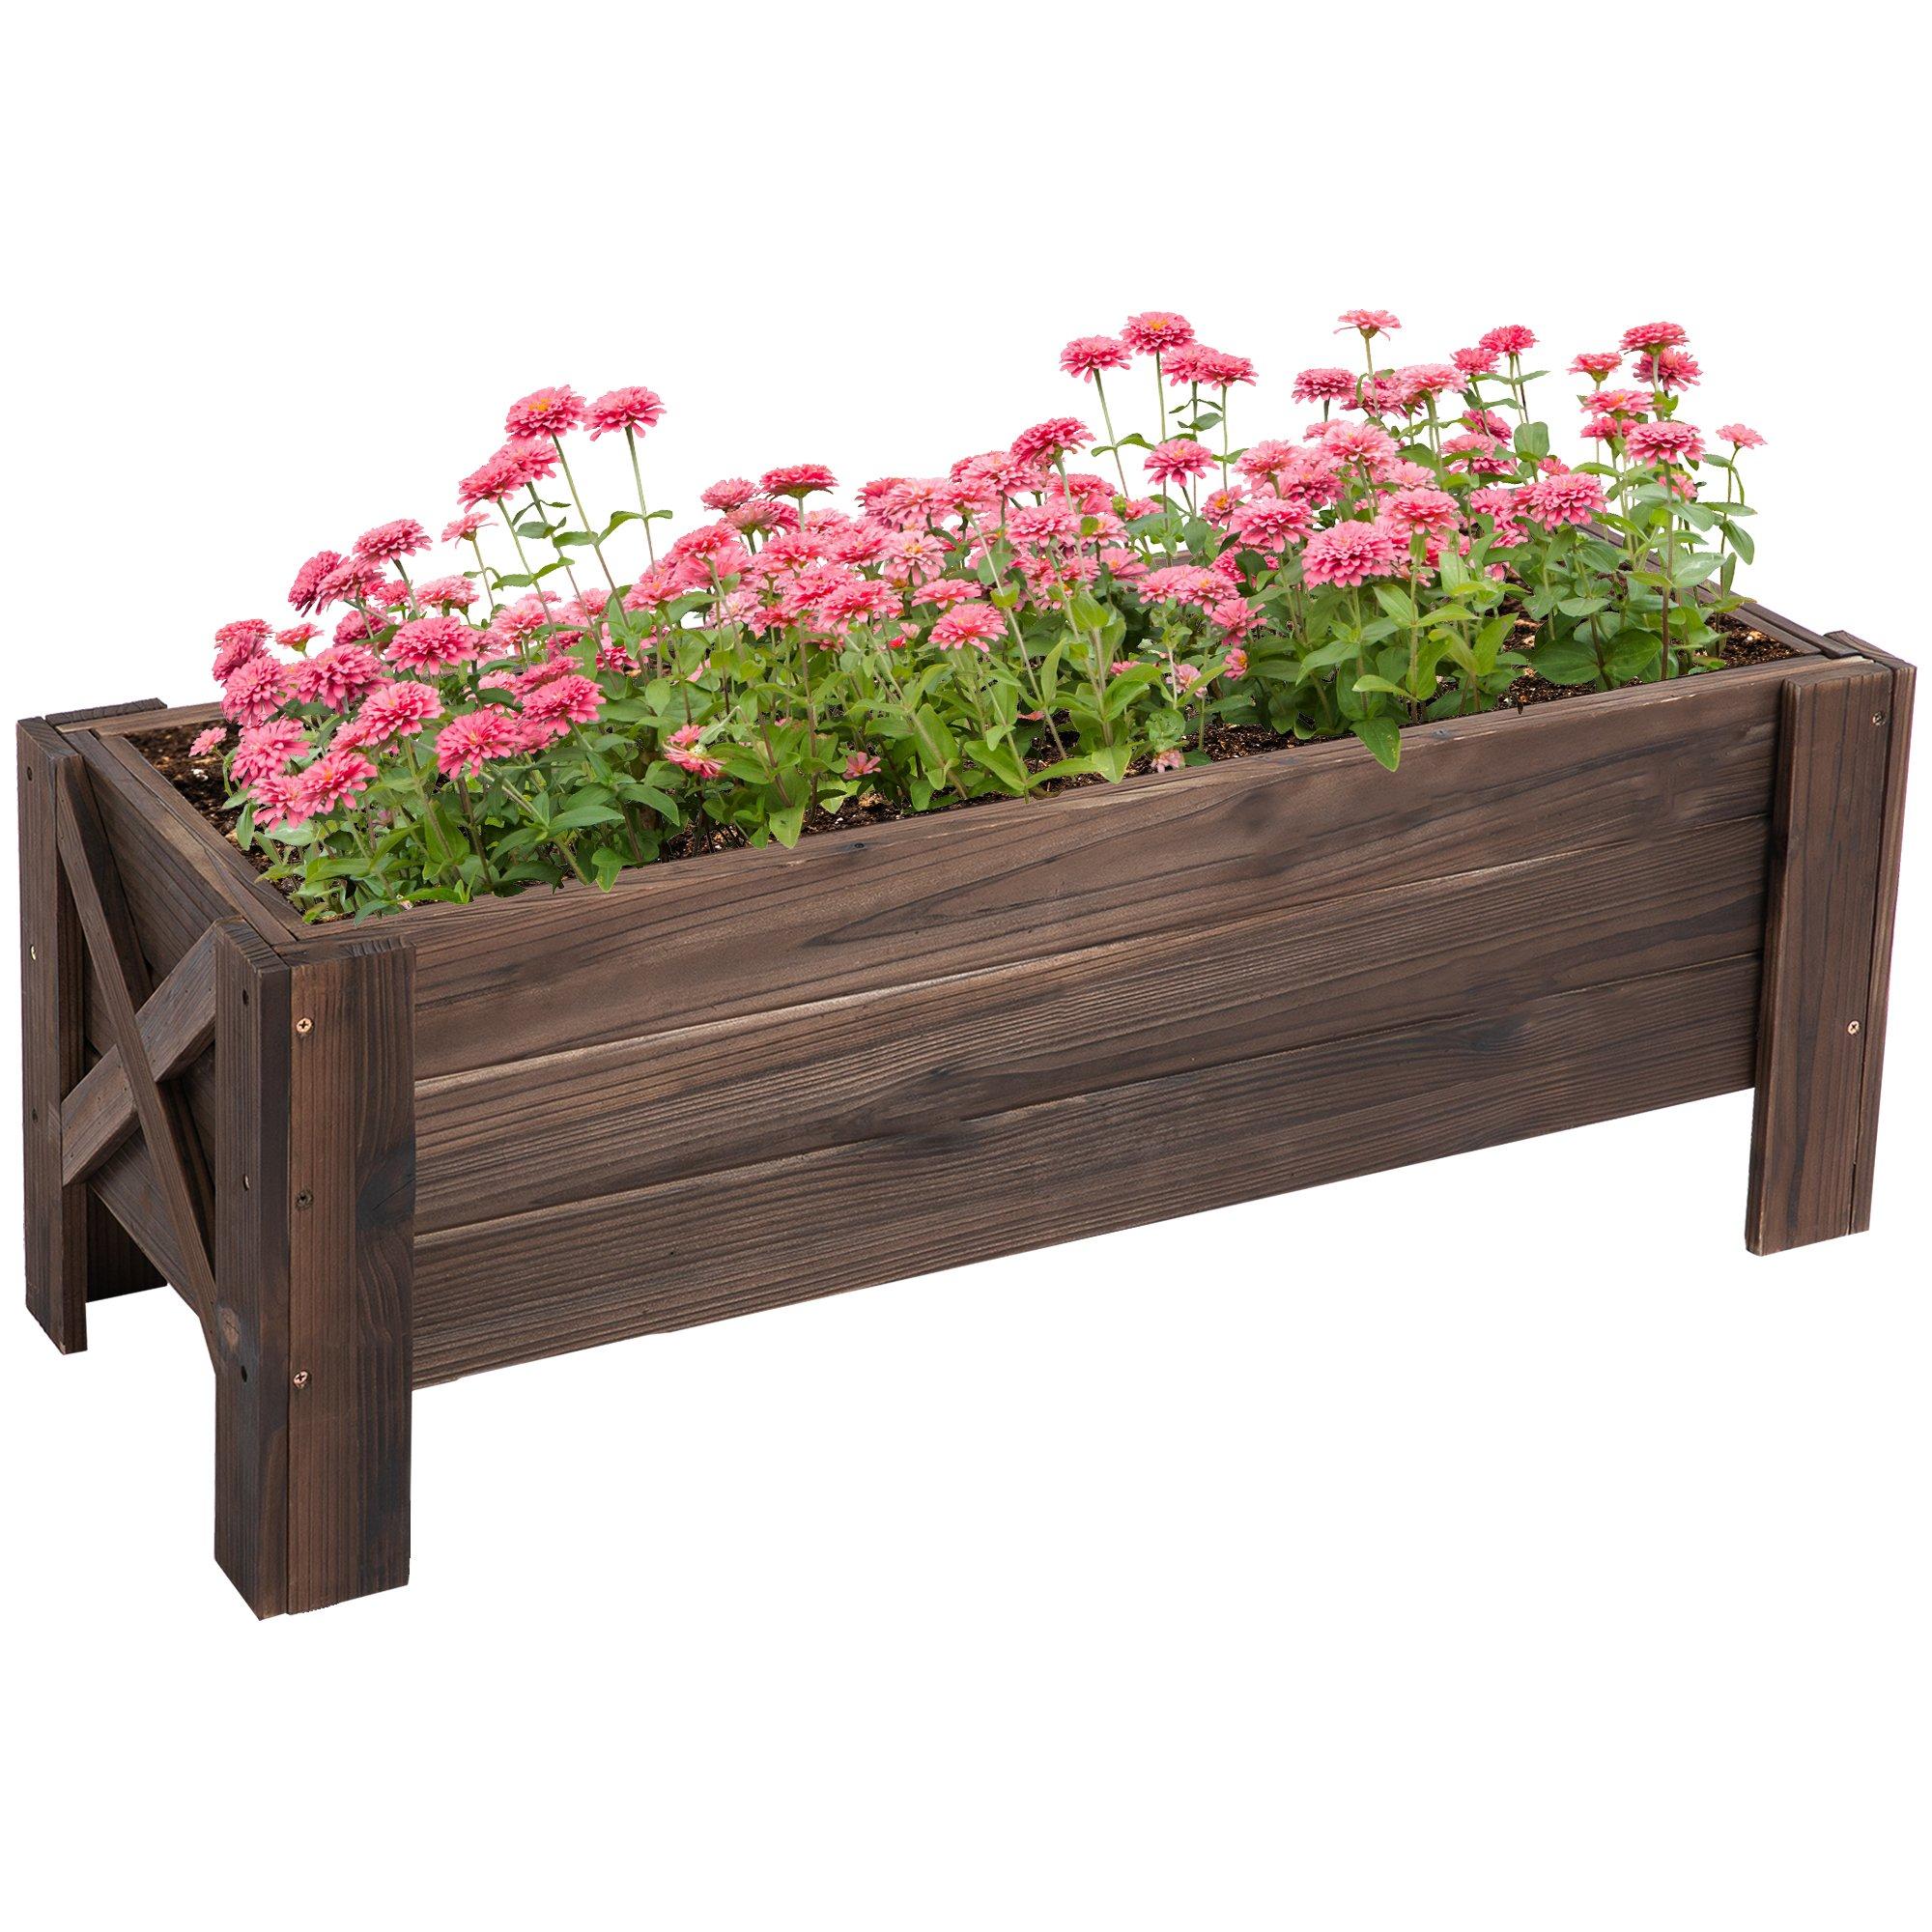 Wooden Garden Raised Bed Planter Grow Containers Pot, 100x36.5x36cm